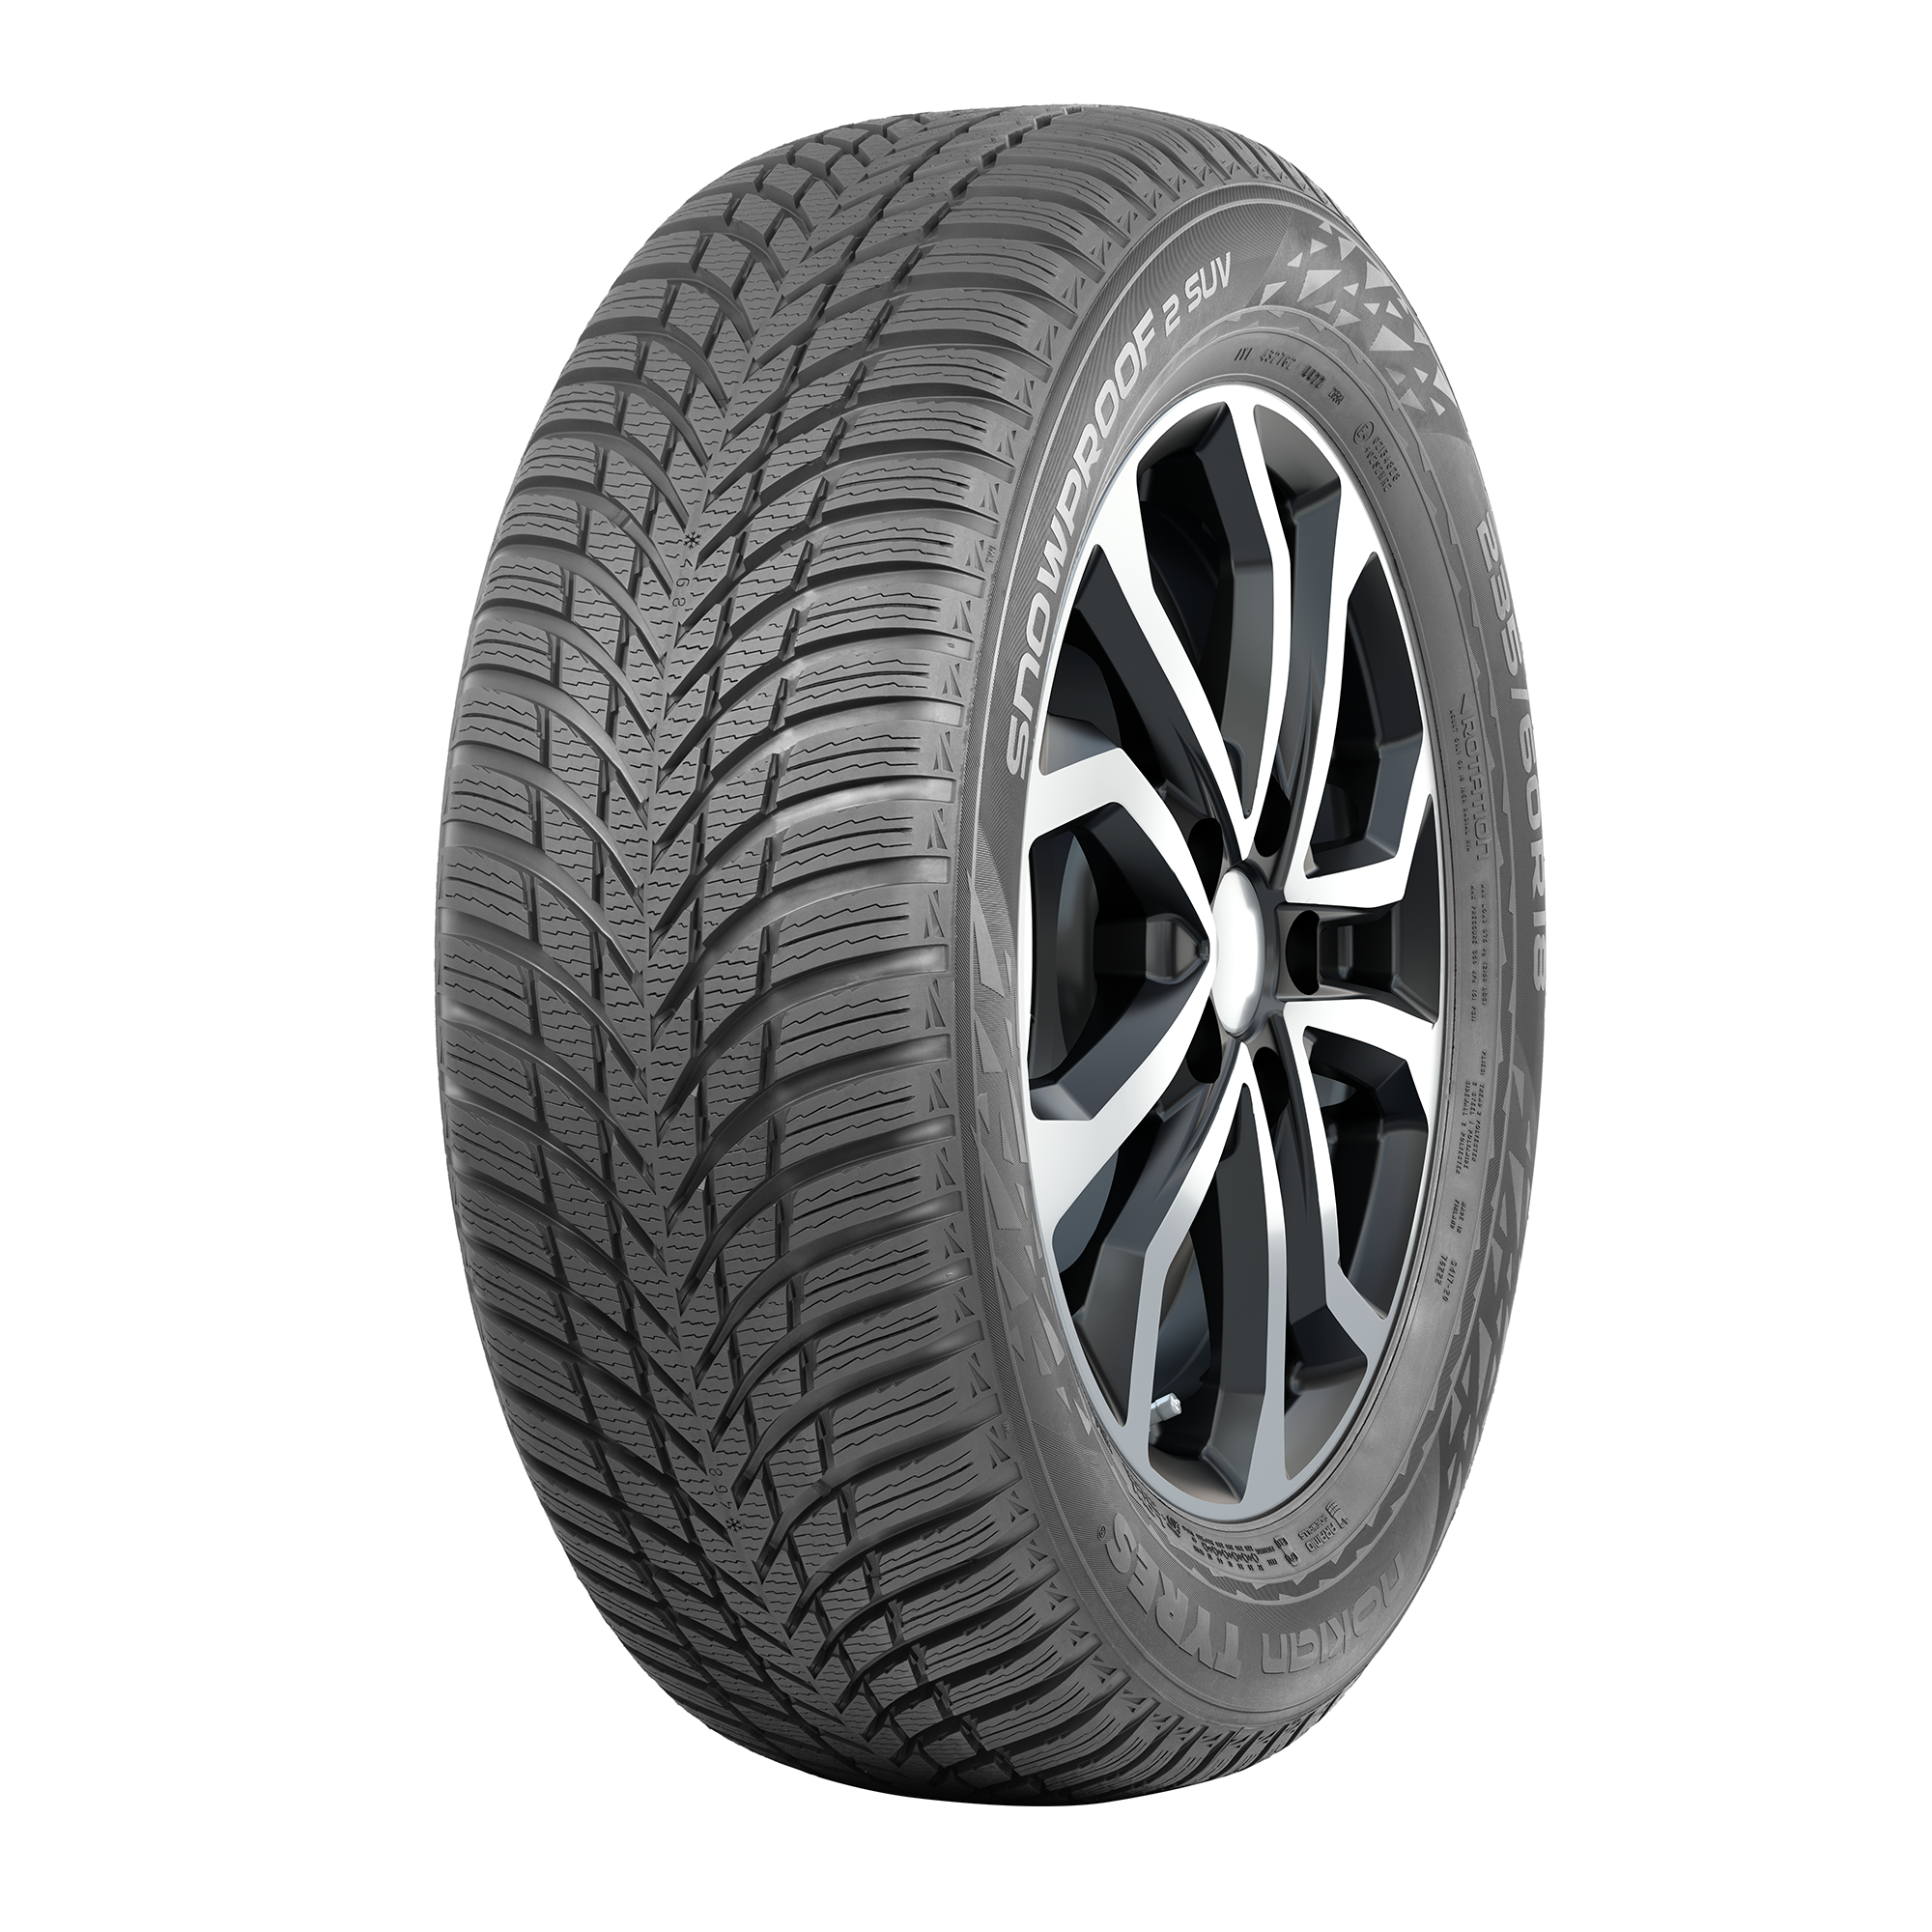 Nokian Tyres Snowproof 2 SUV XL 235/55 R17 103H